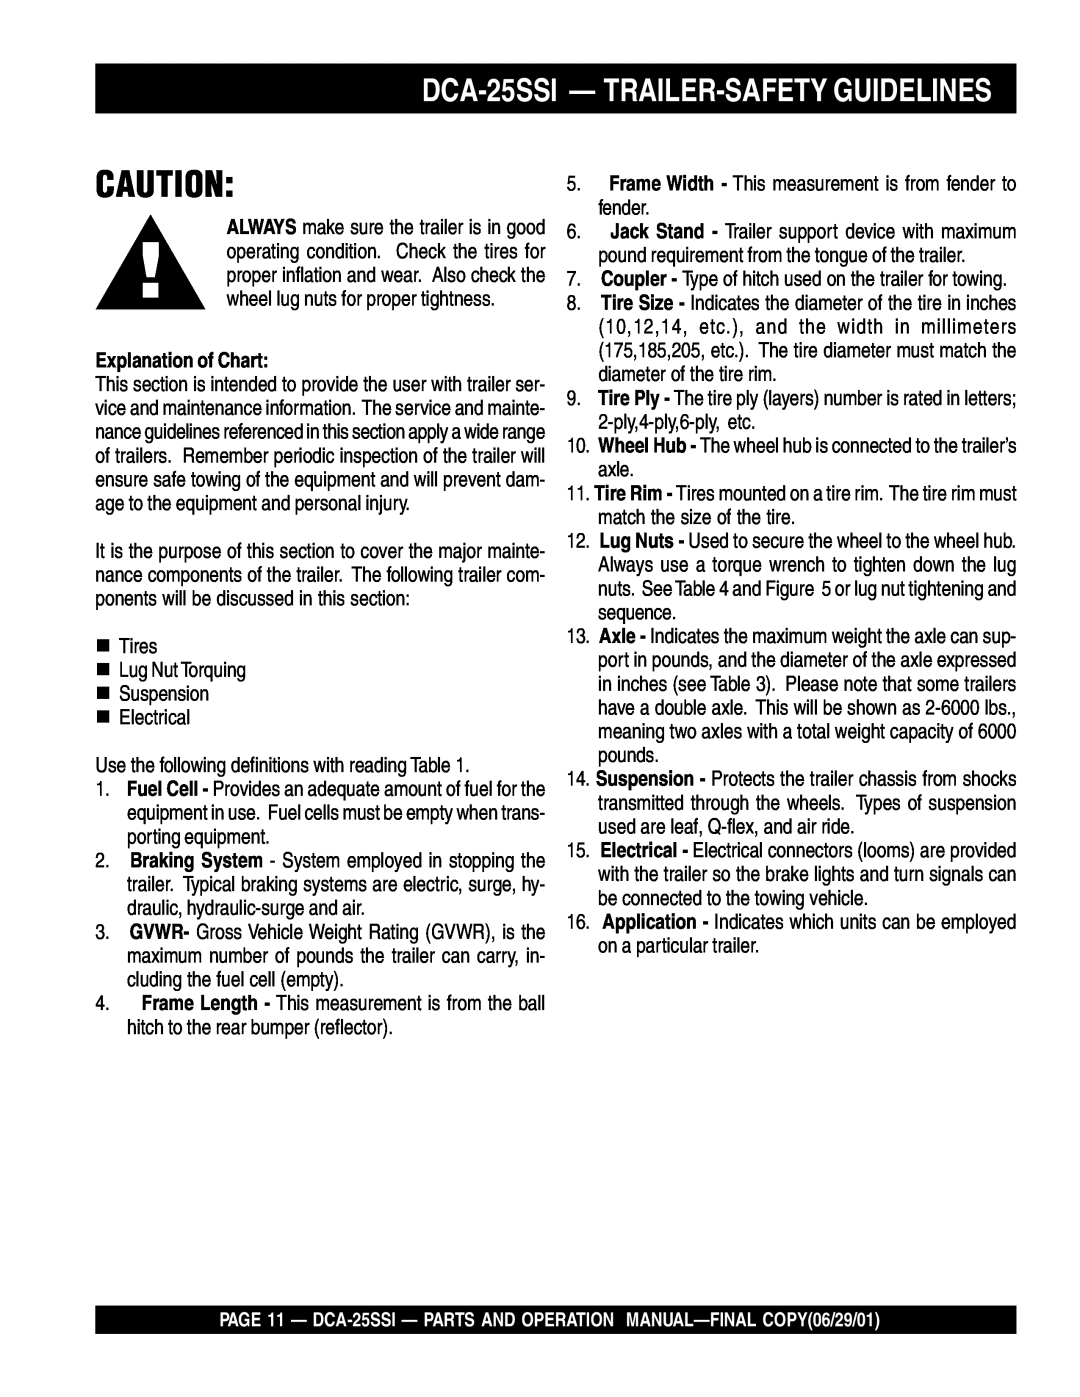 Multiquip operation manual DCA-25SSI— TRAILER-SAFETYGUIDELINES, Explanation of Chart 